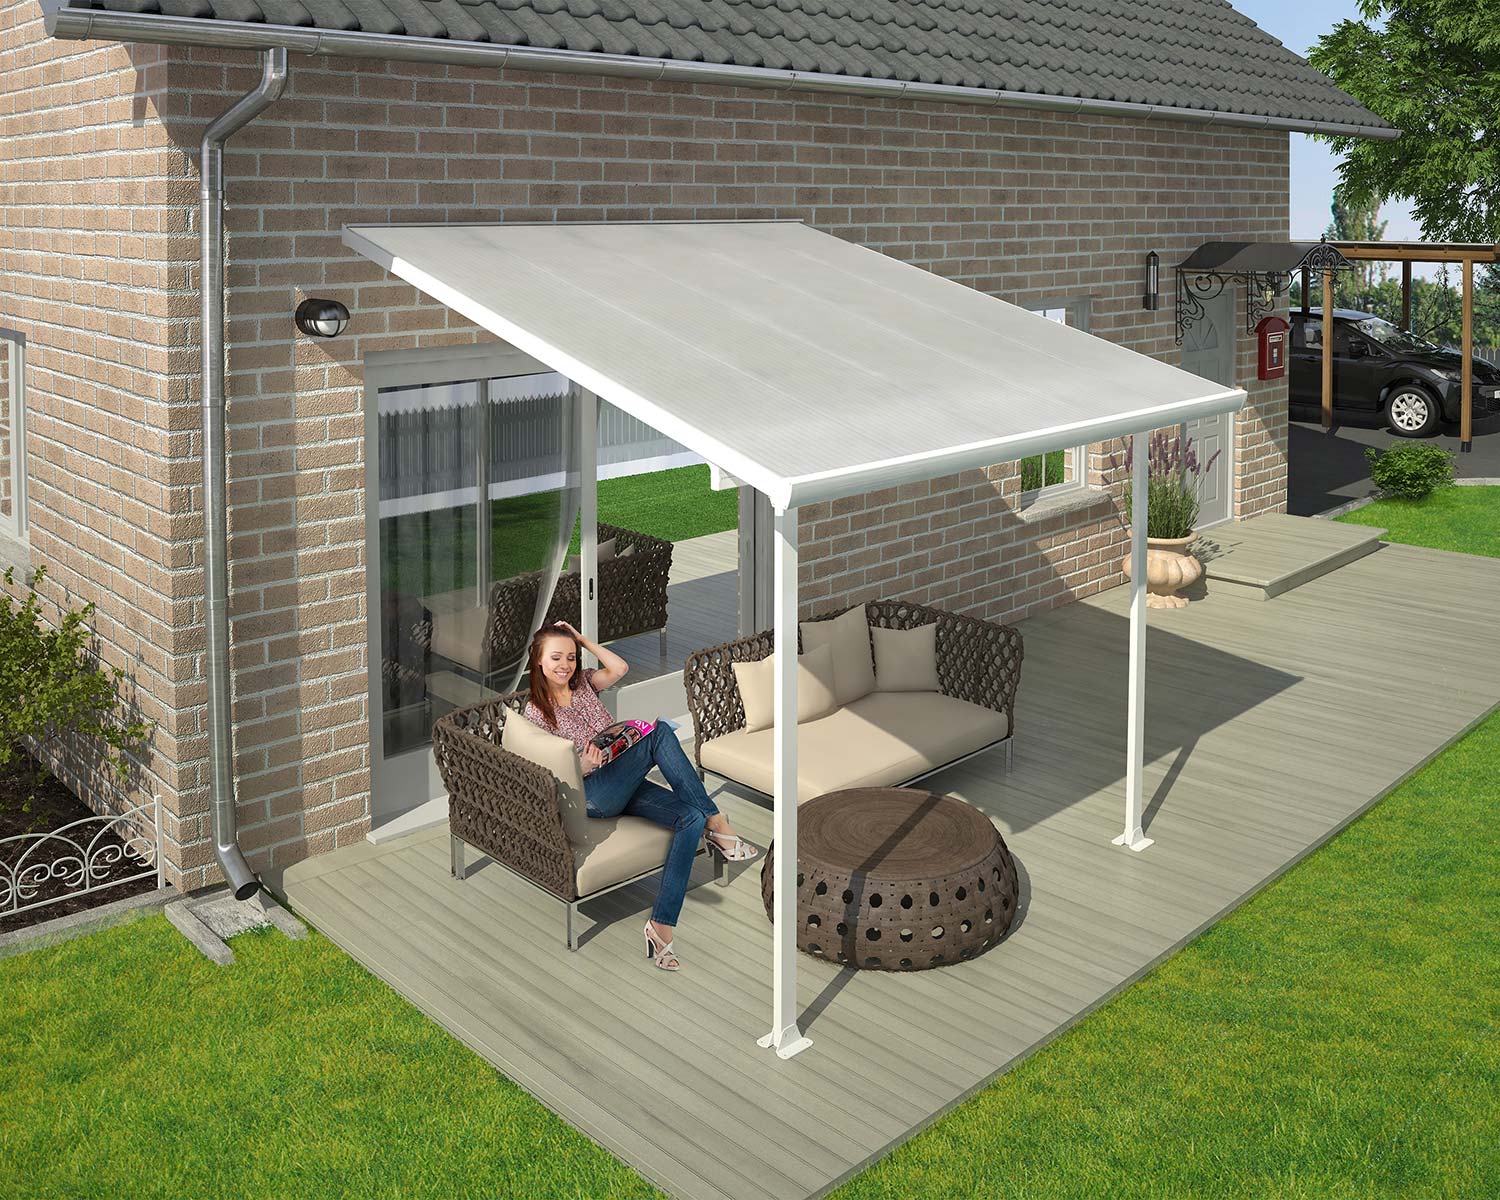 Feria 10 ft. x 10 ft. White Aluminium Patio Cover with 2 Posts and White Polycarbonate Roof Panels Attached to House that Covers Patio Outdoor Furniture